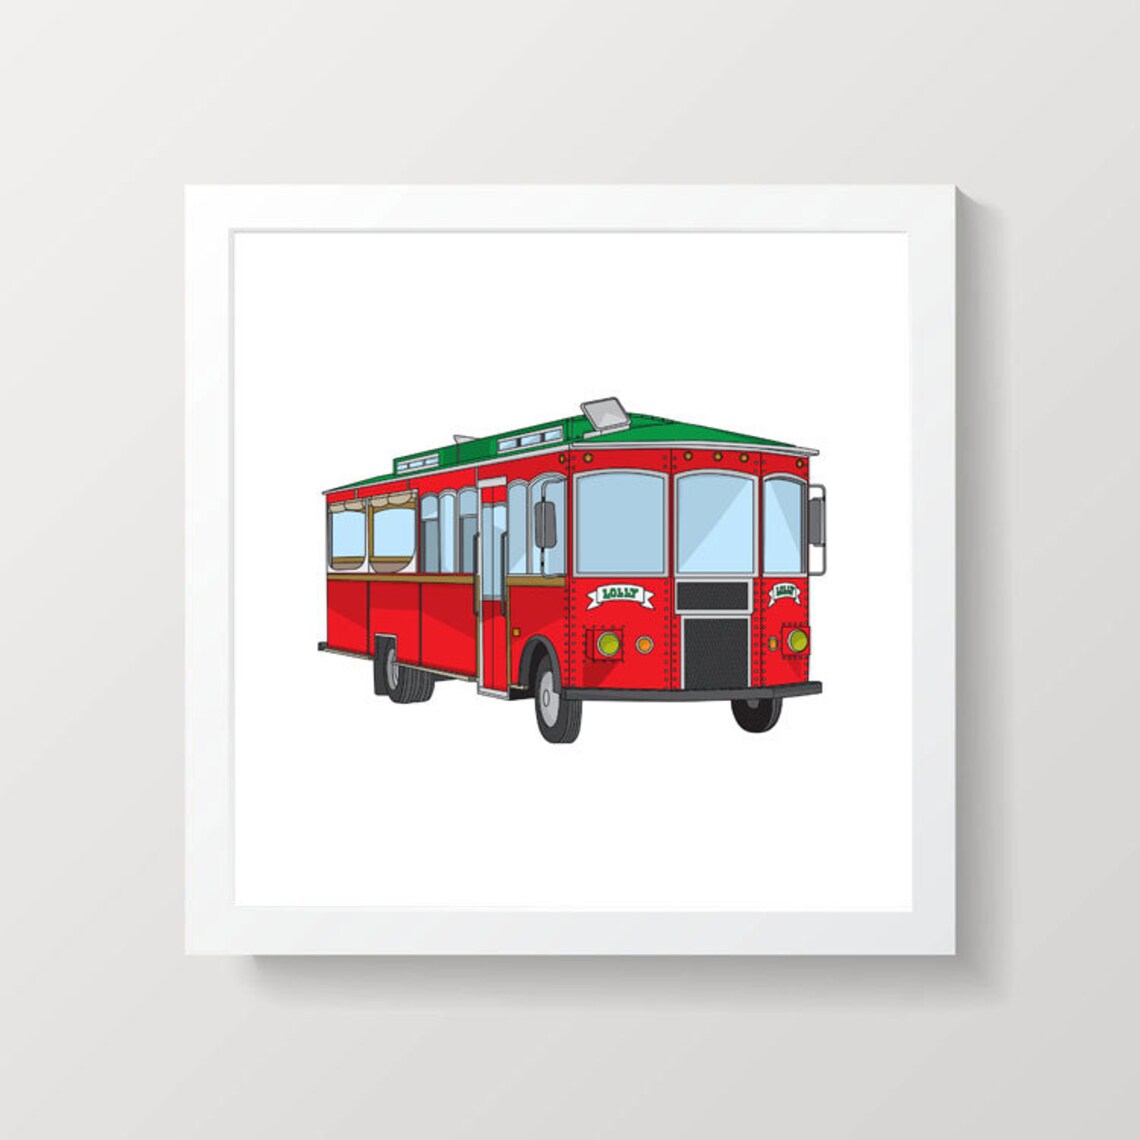 Lolly the Trolley - Etsy